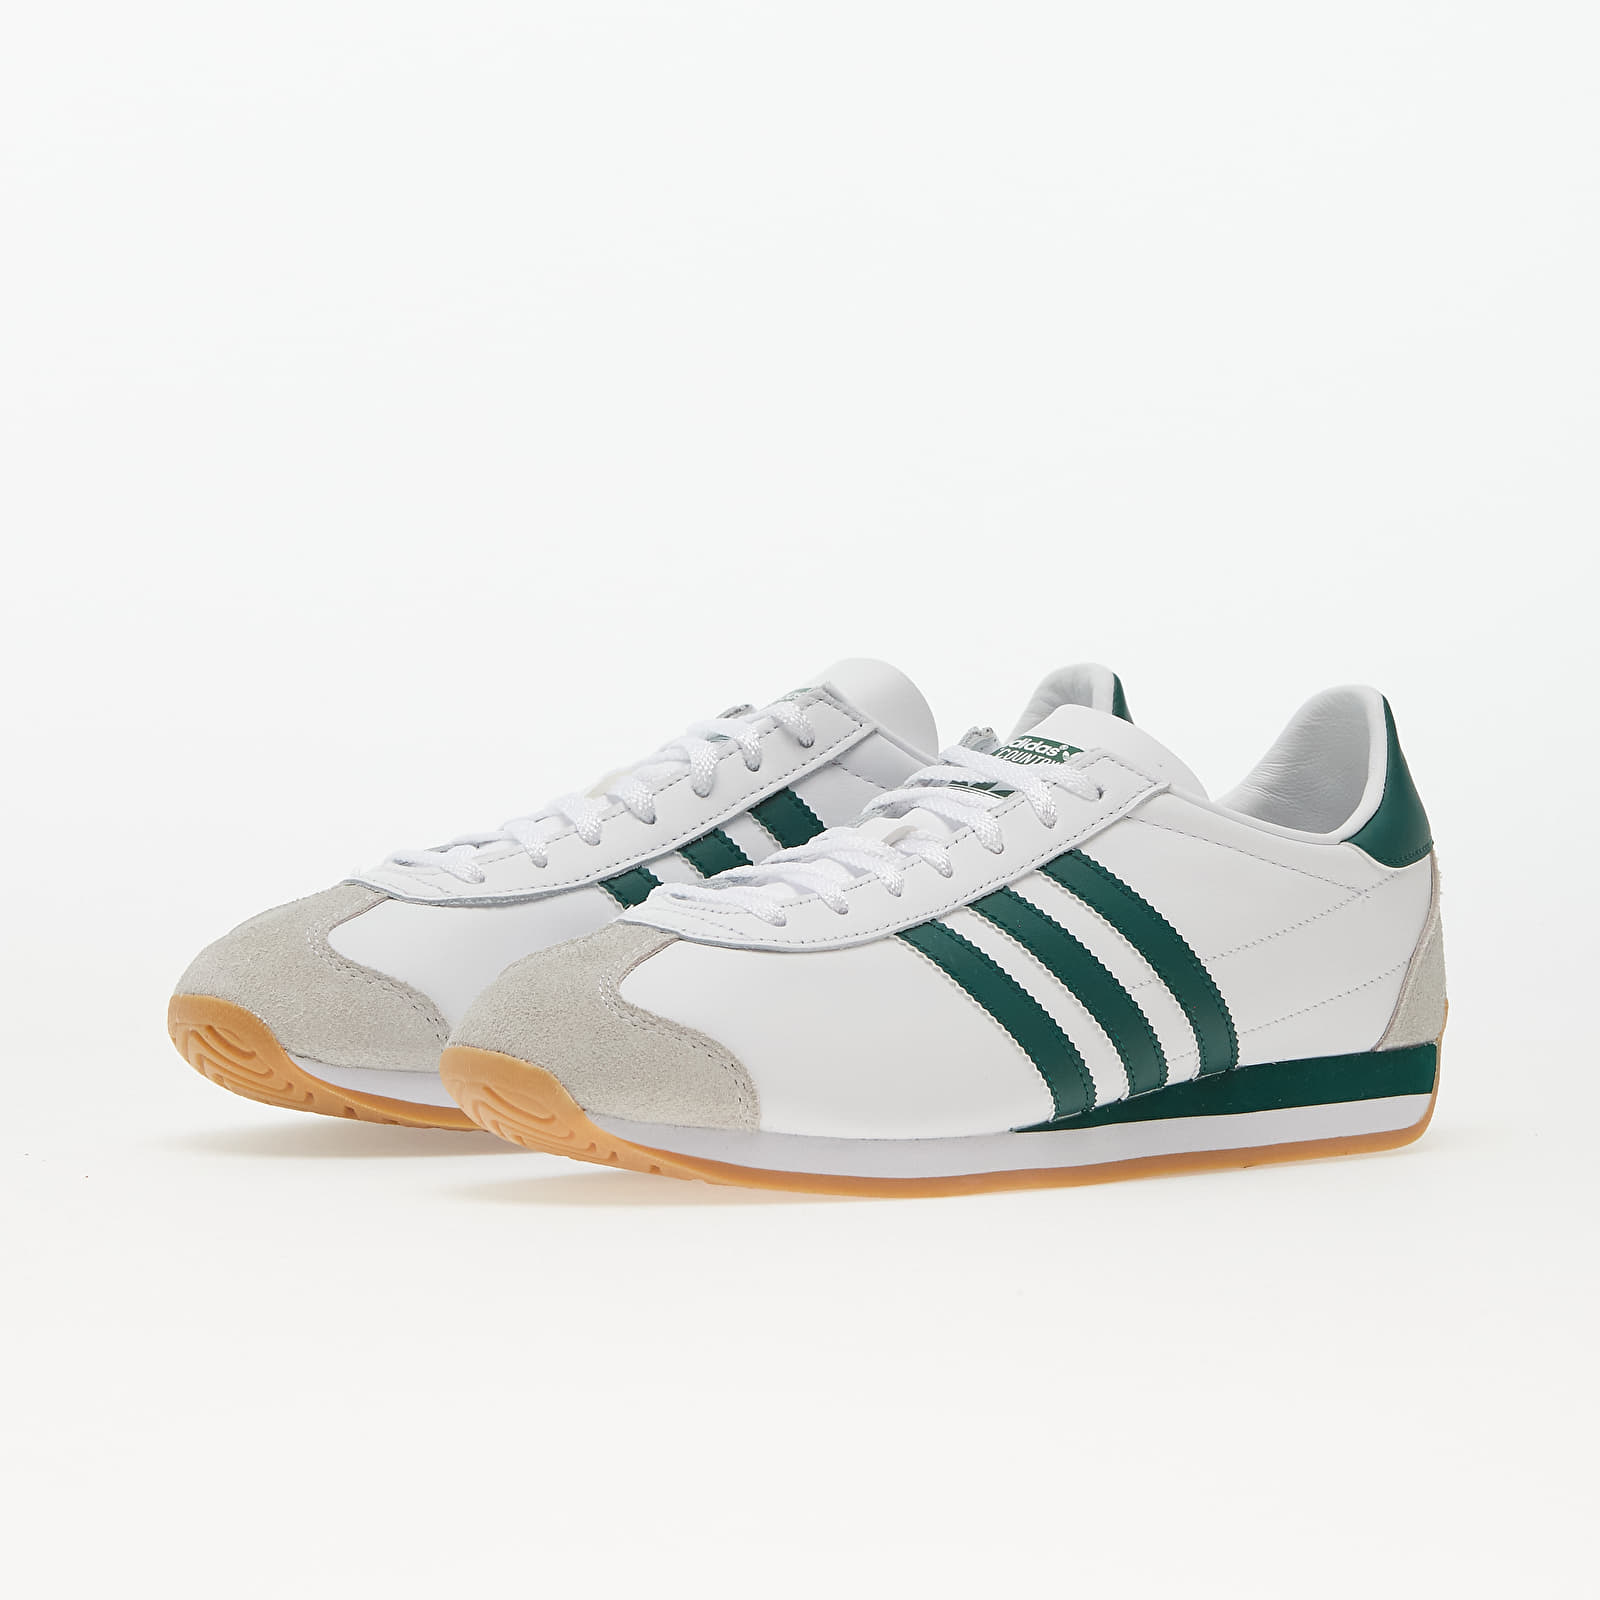 Men's shoes adidas Country Og Ftw White/ Collegiate Green/ Ftw White |  Footshop